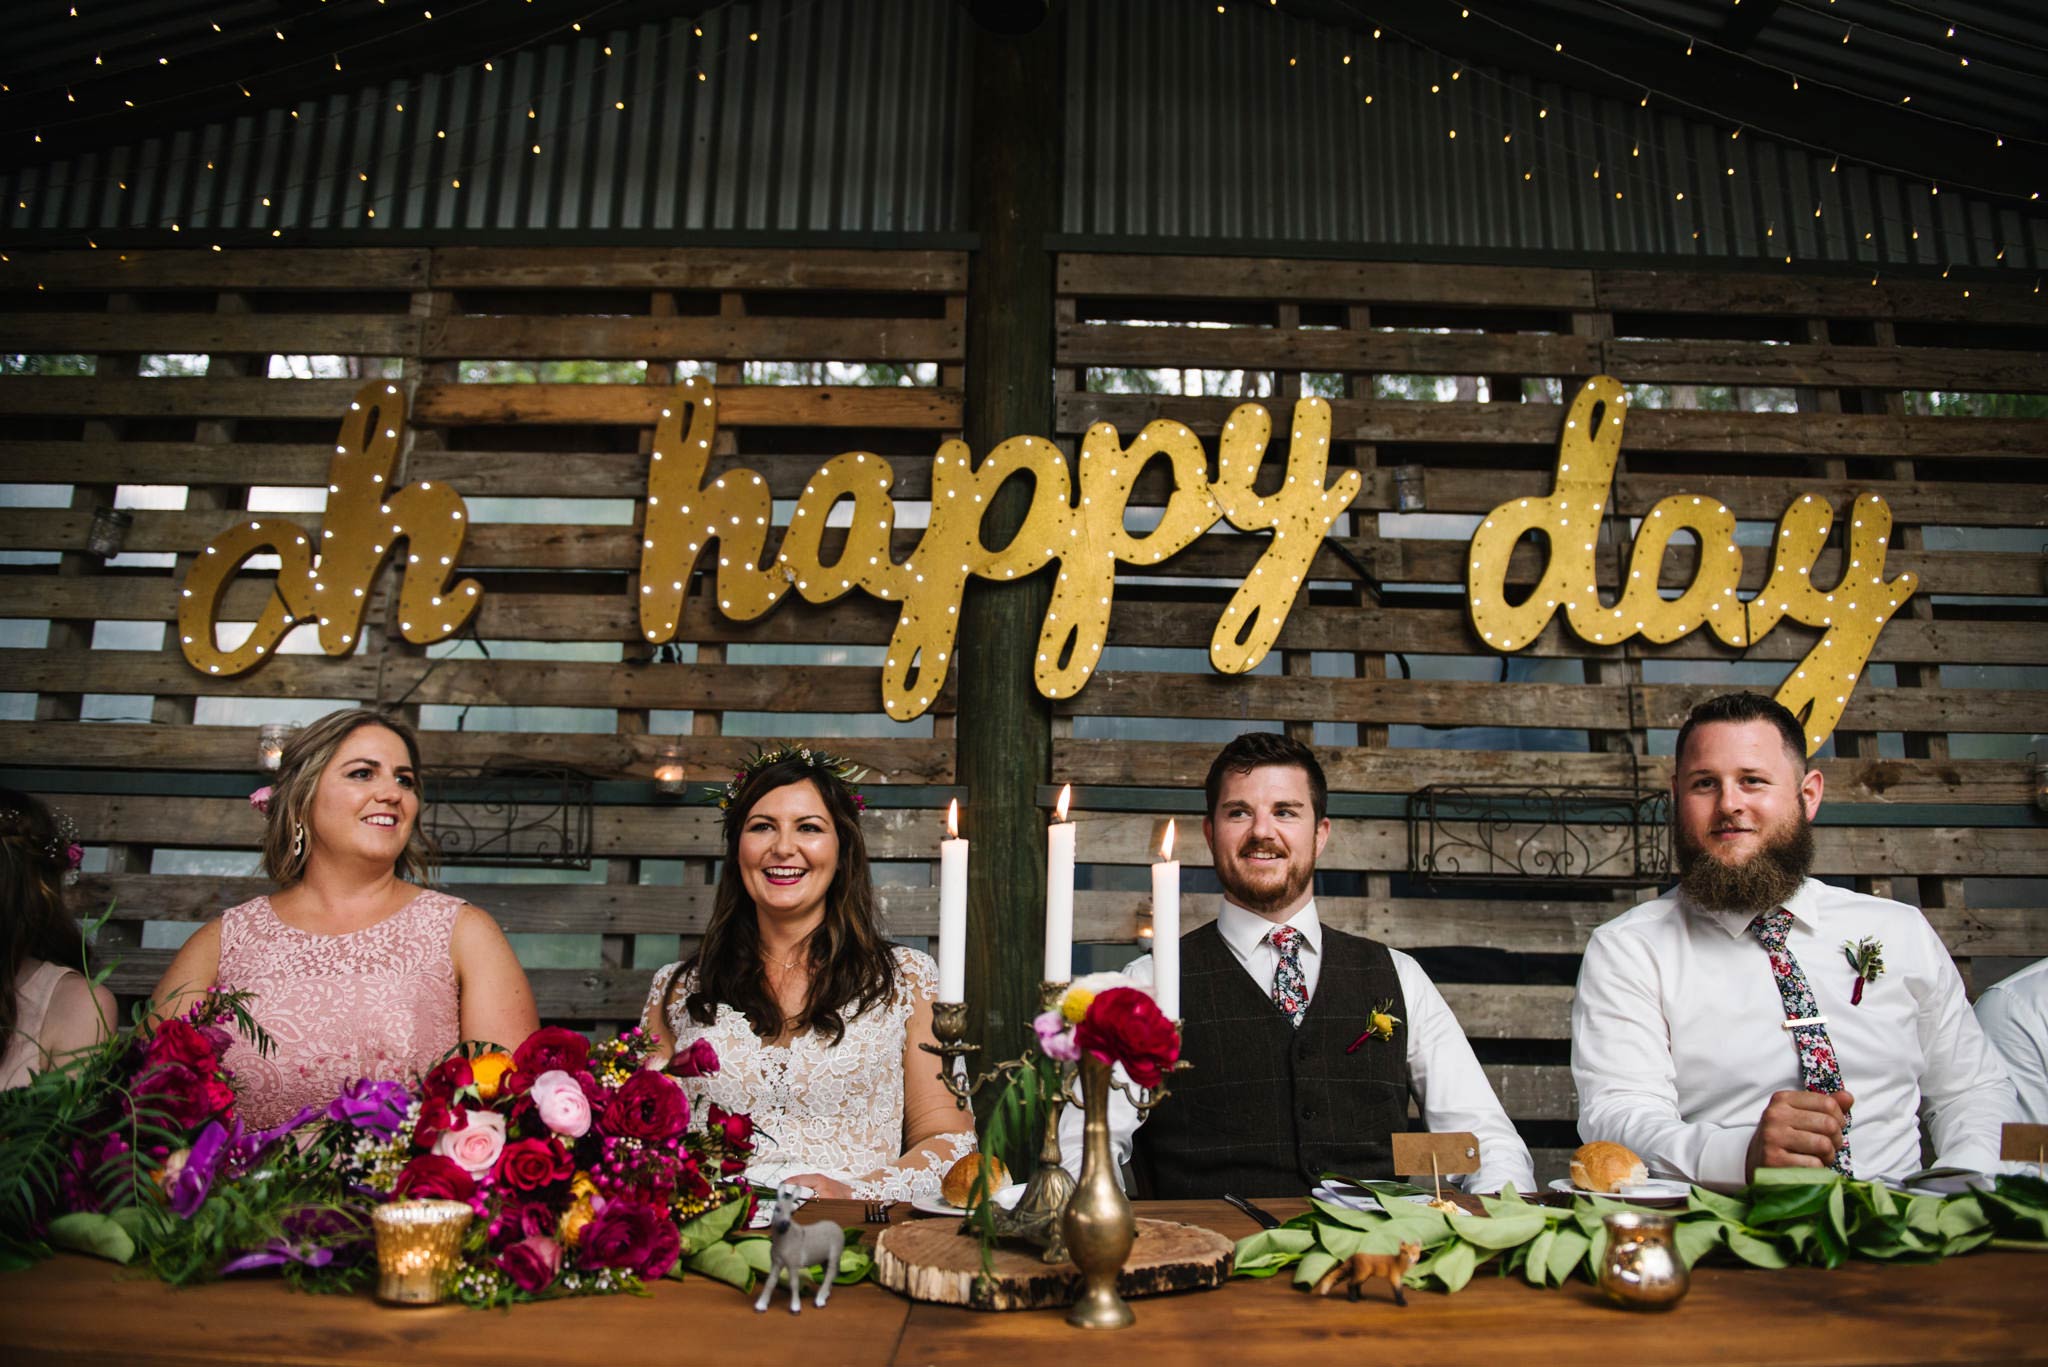 Oh Happy Day sign above bridal table